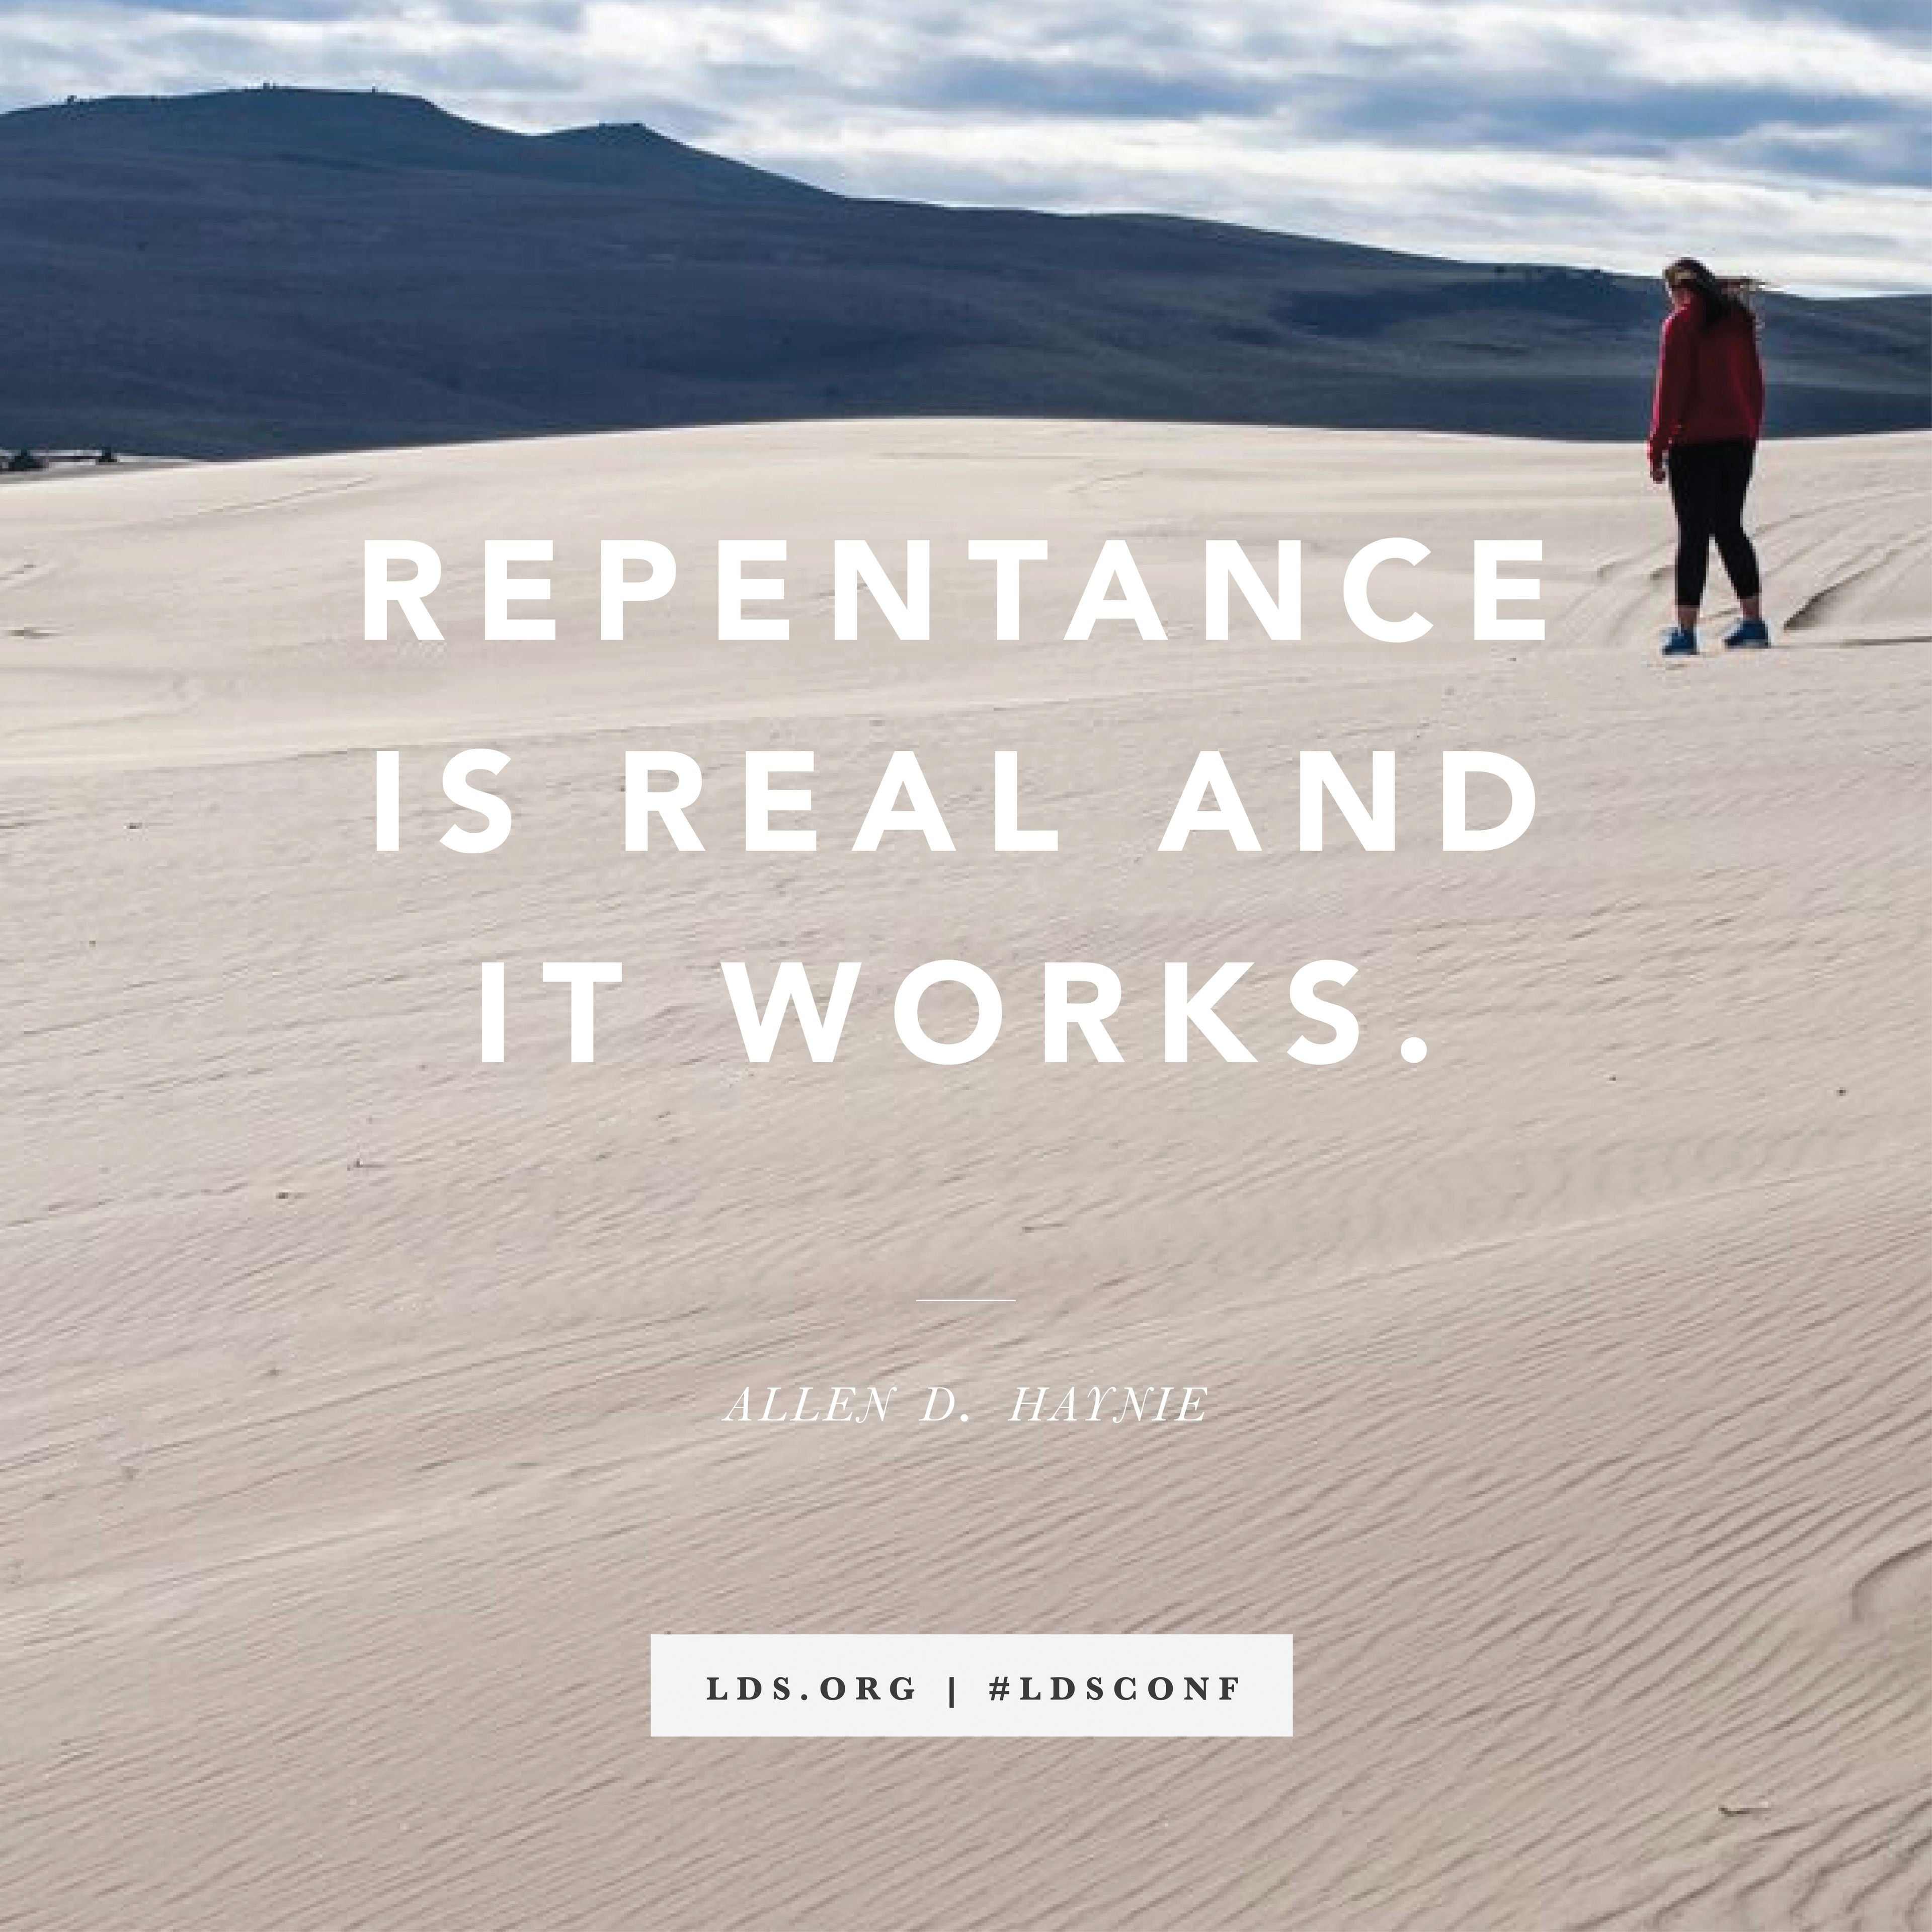 “Repentance is real and it works.” —Elder Allen D. Haynie, “Remembering in Whom We Have Trusted”